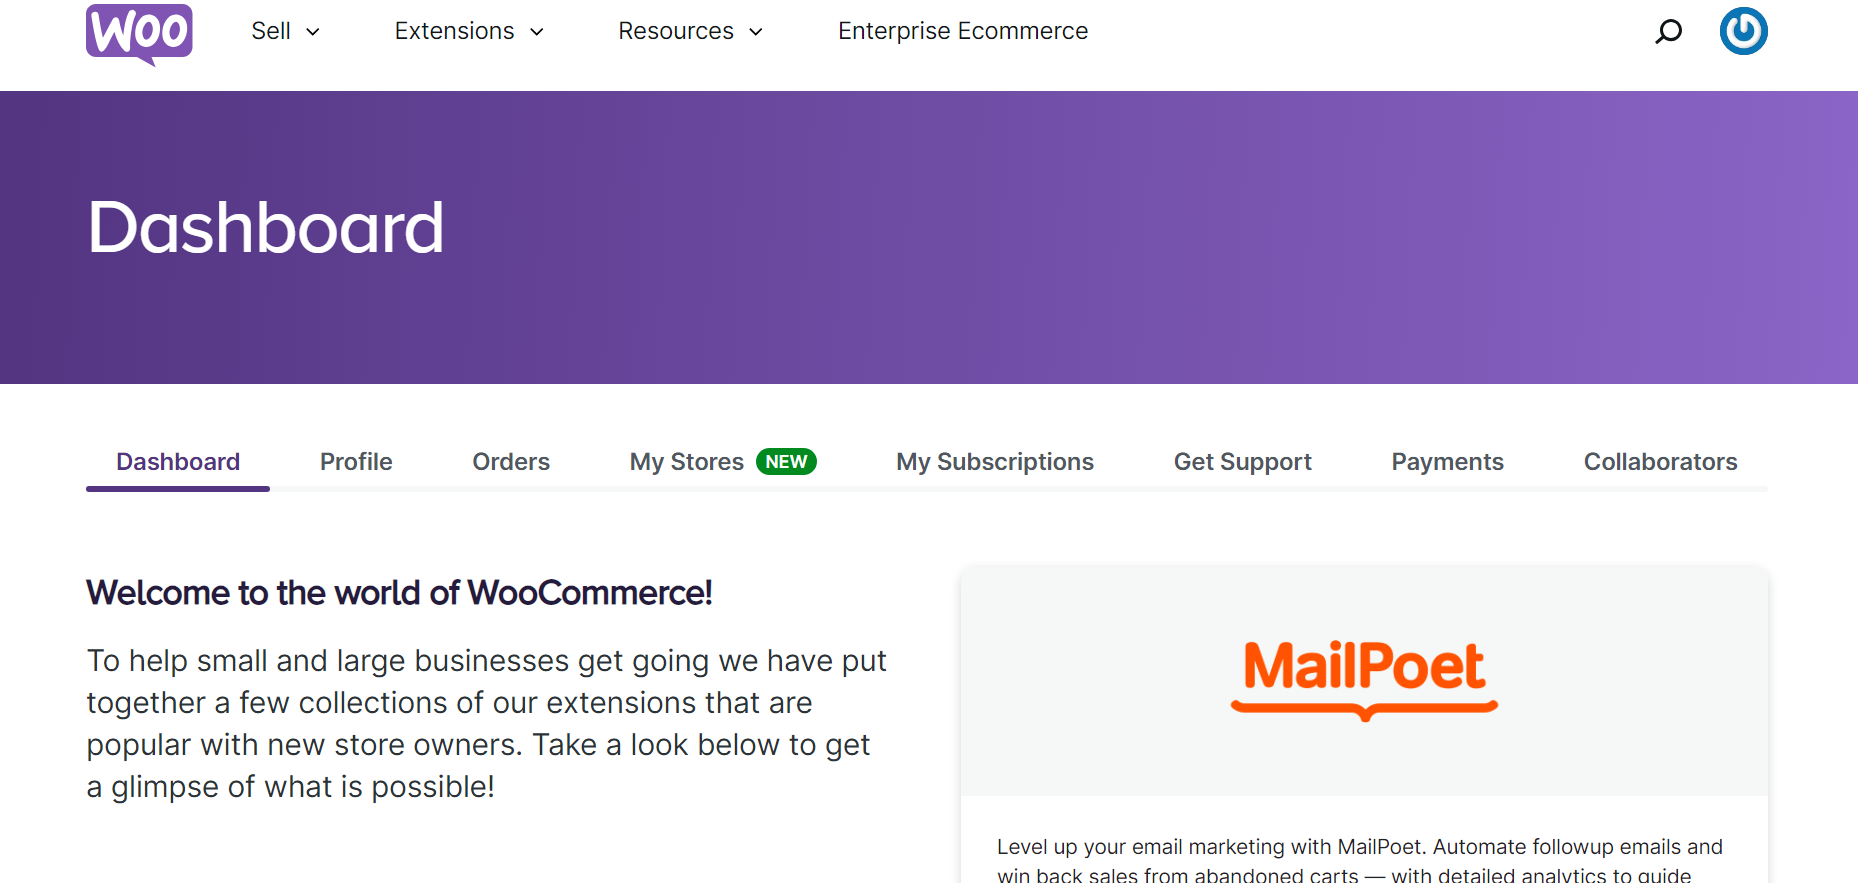 WooCommerce main page